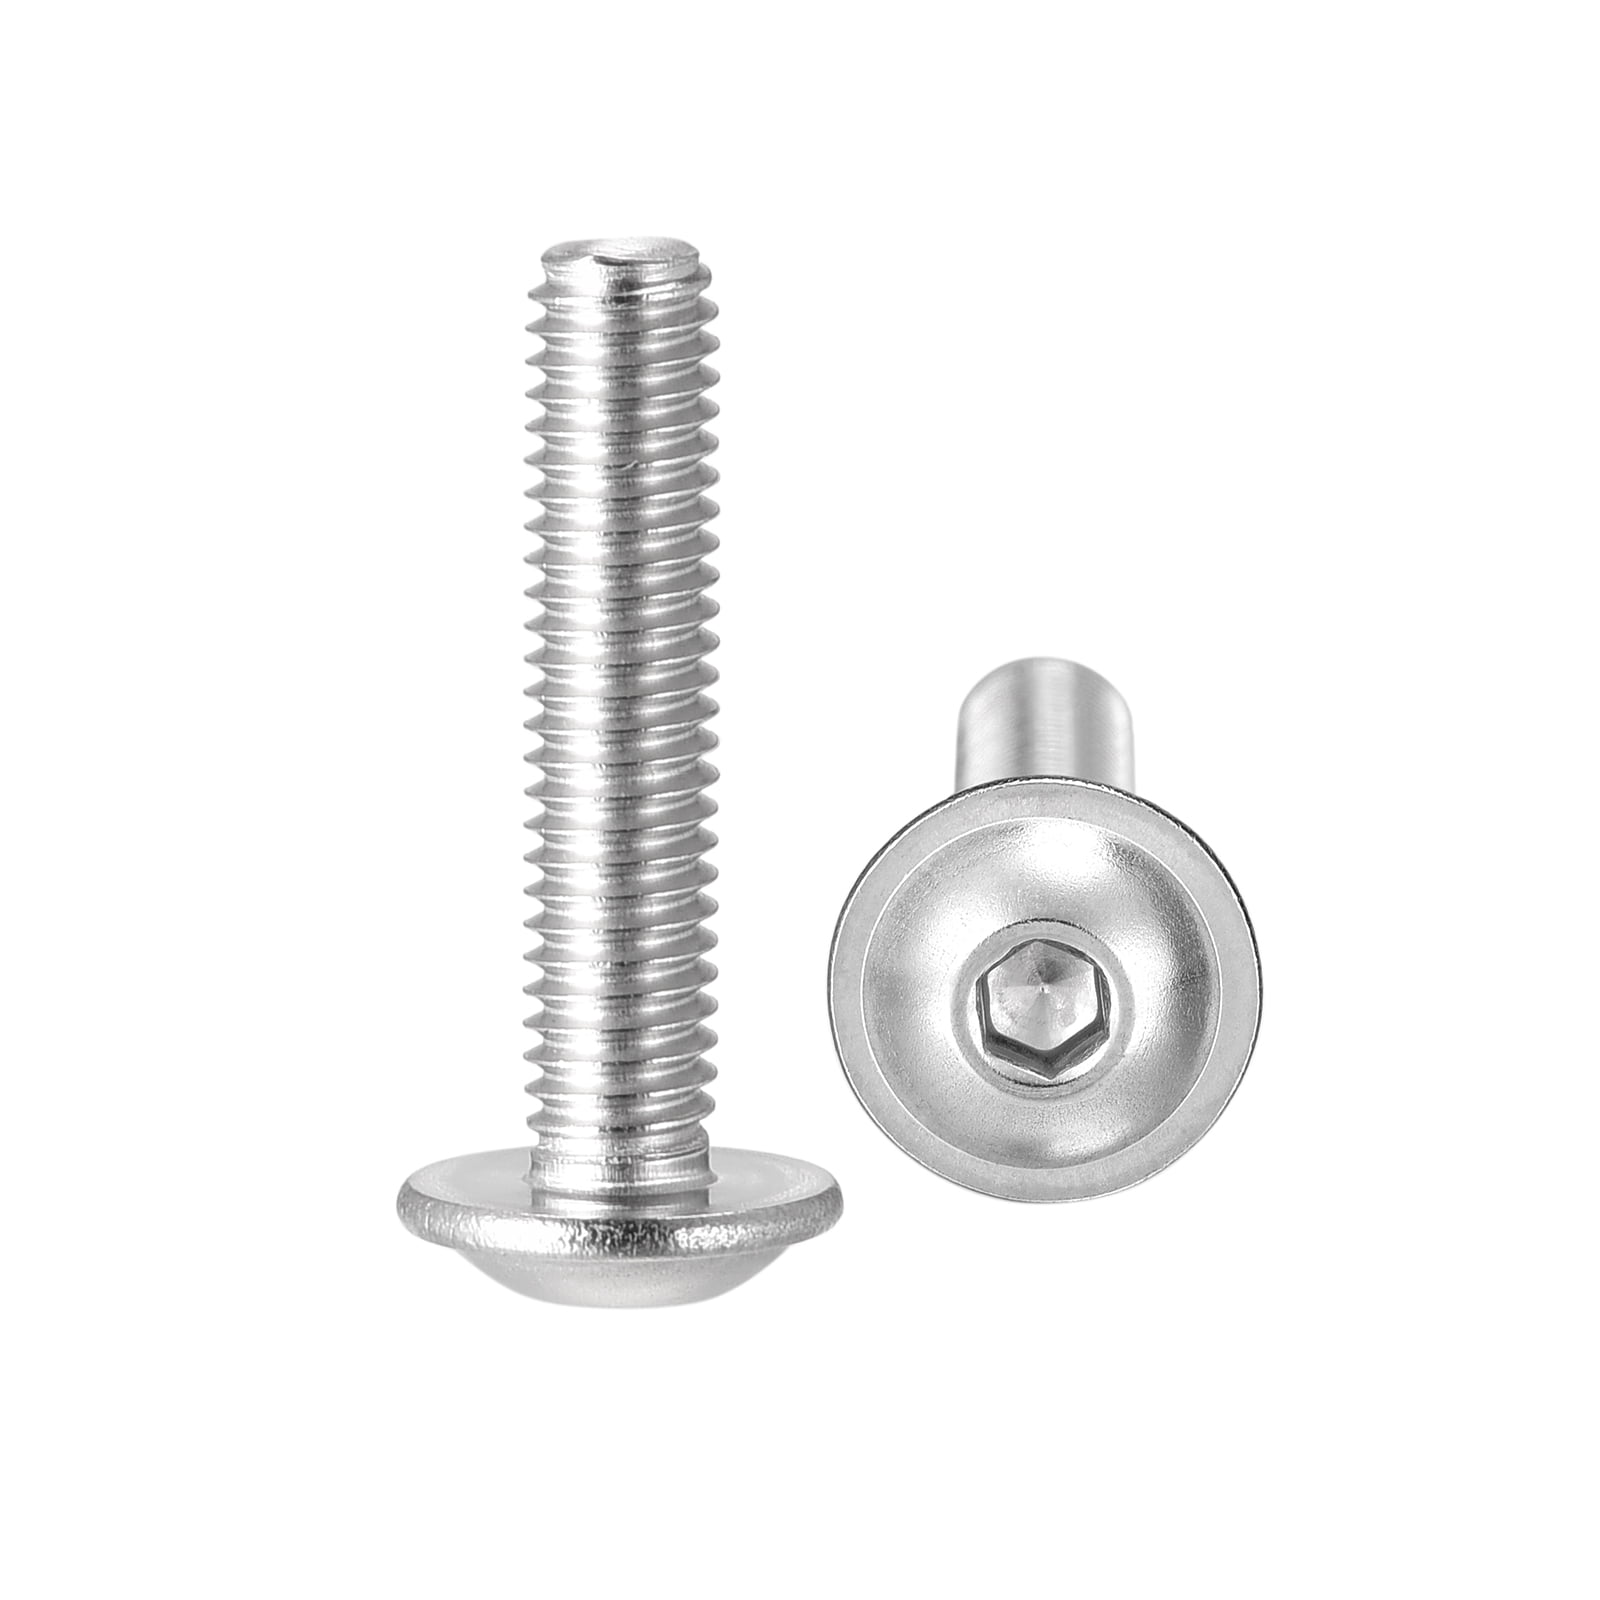 M10-1.5mm x 30mm Hex Tap Bolts 50-18-8 Stainless Steel Qty 